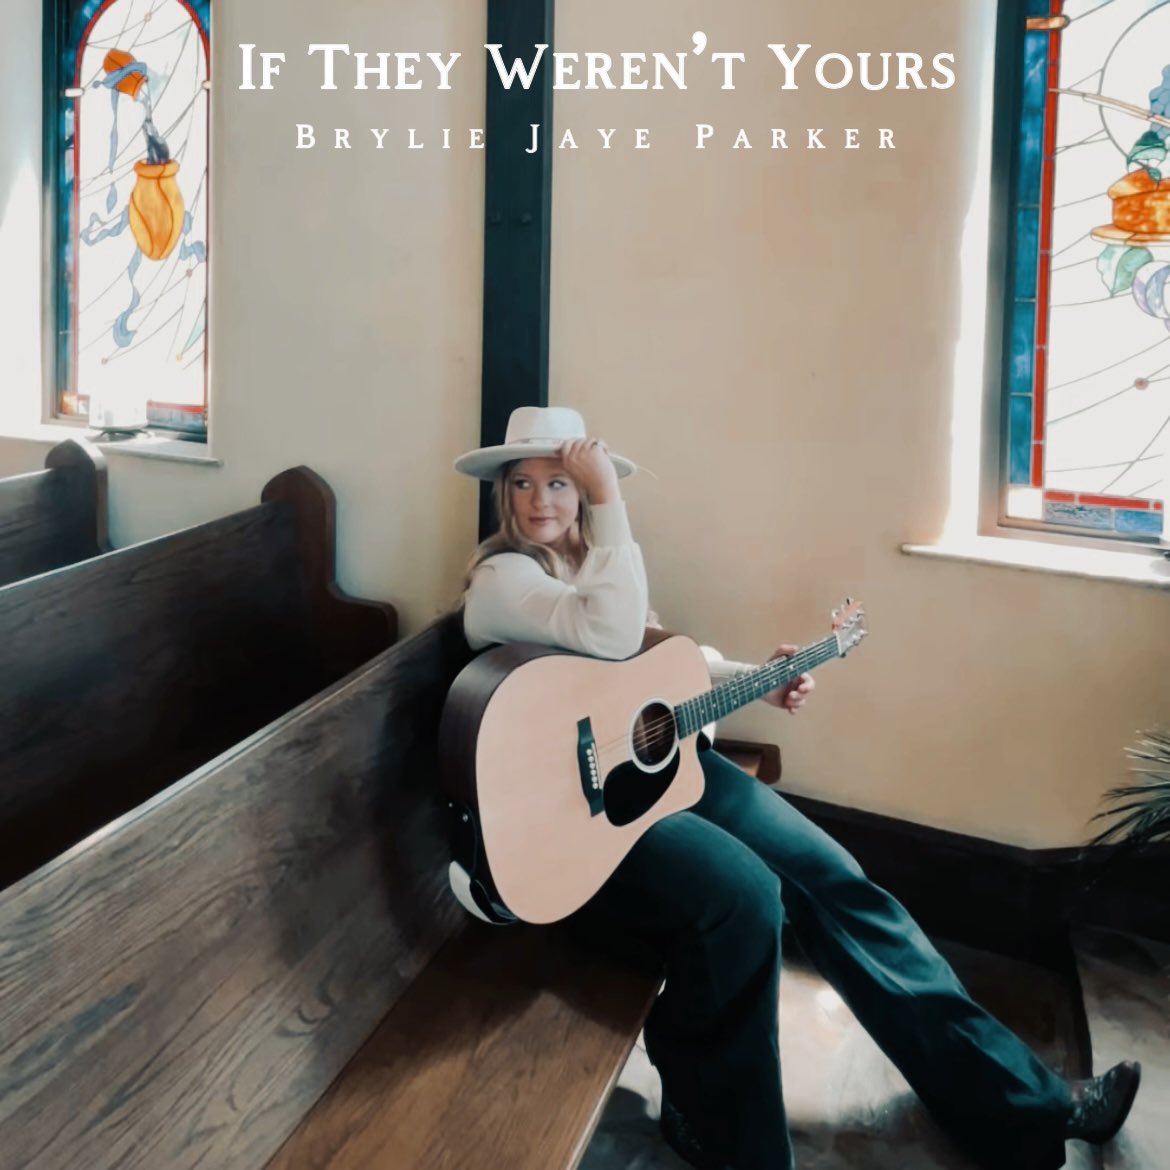 out now!! my debut album - If They Weren’t Yours 🤍
•
available on all streaming platforms!!
#allforJesus #worship #debutalbum #newalbum #christian #christiansinger #christiansongwriter #singer #songwriter #guitar #church #country #contemporarychristian #countrysinger